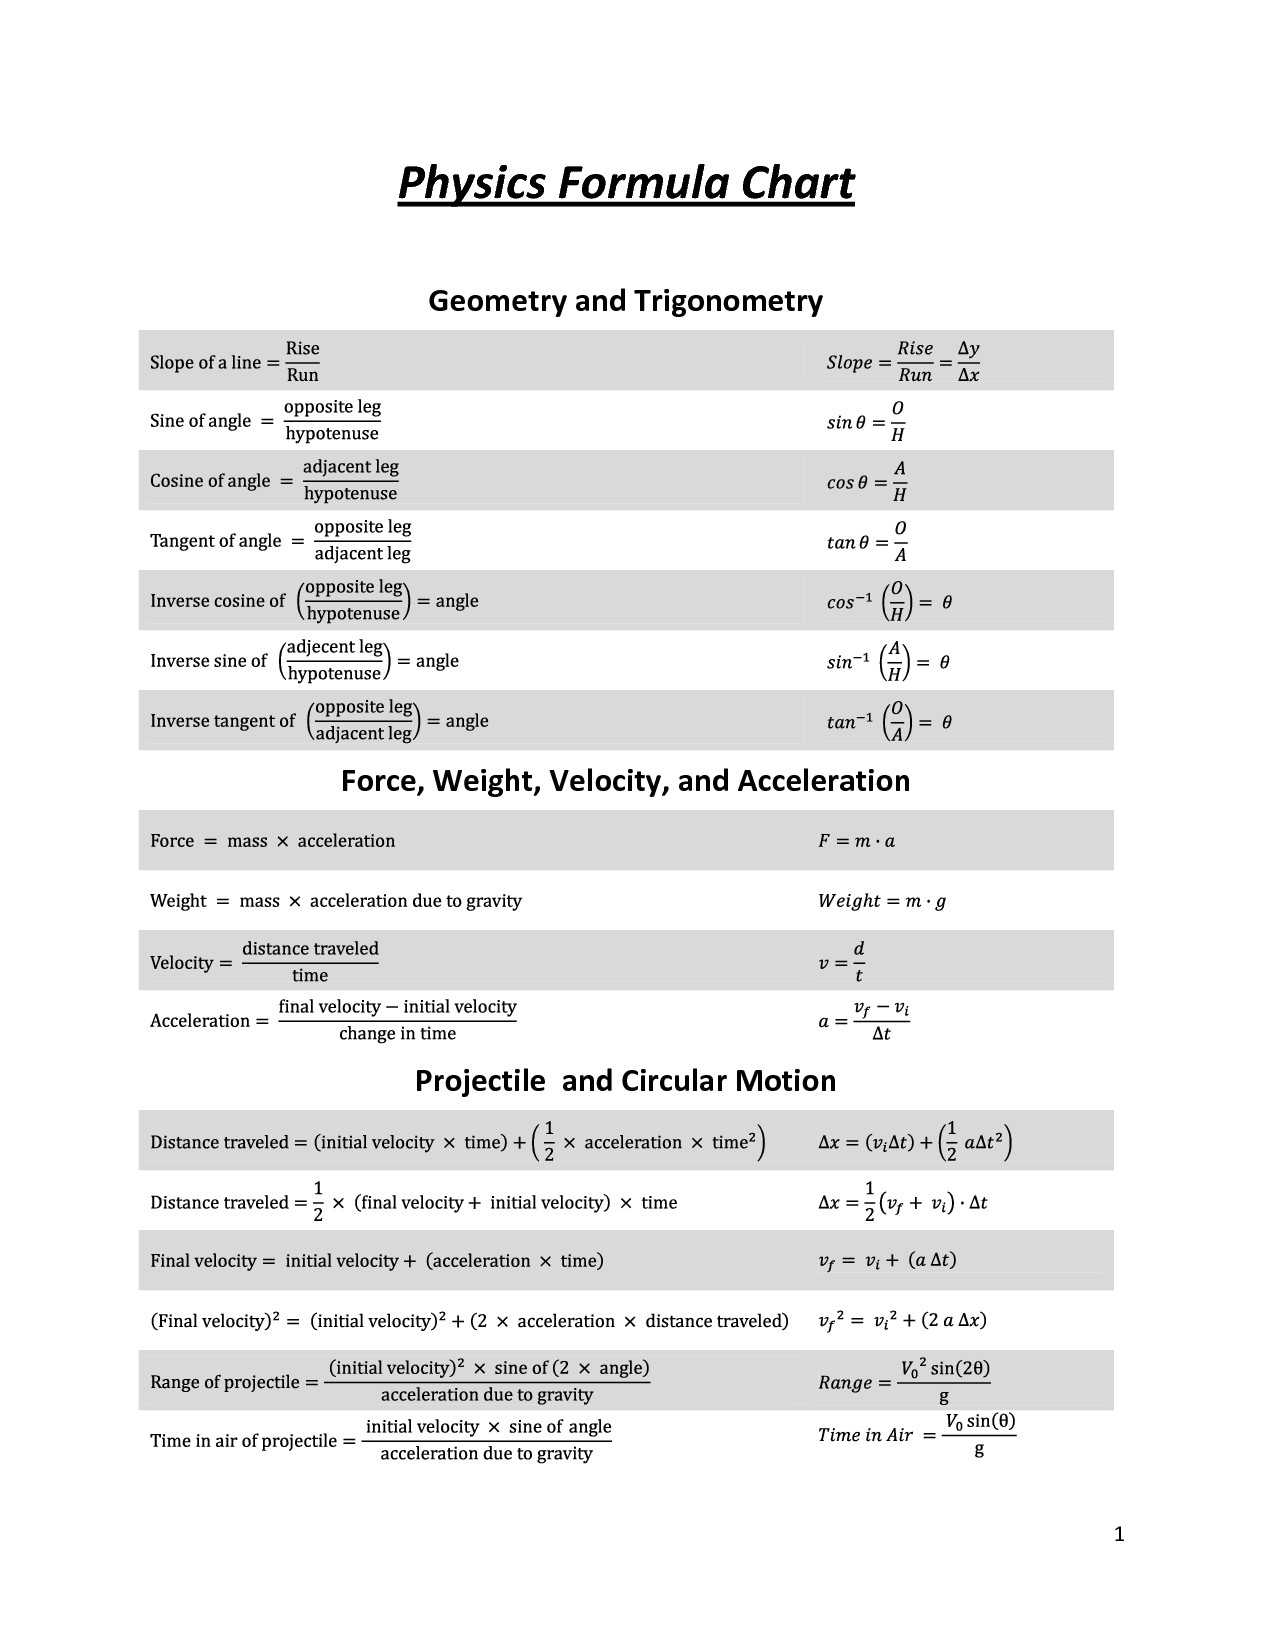 Drawing Free Body Diagrams Worksheet Answers Physics Classroom Along with Physics High School